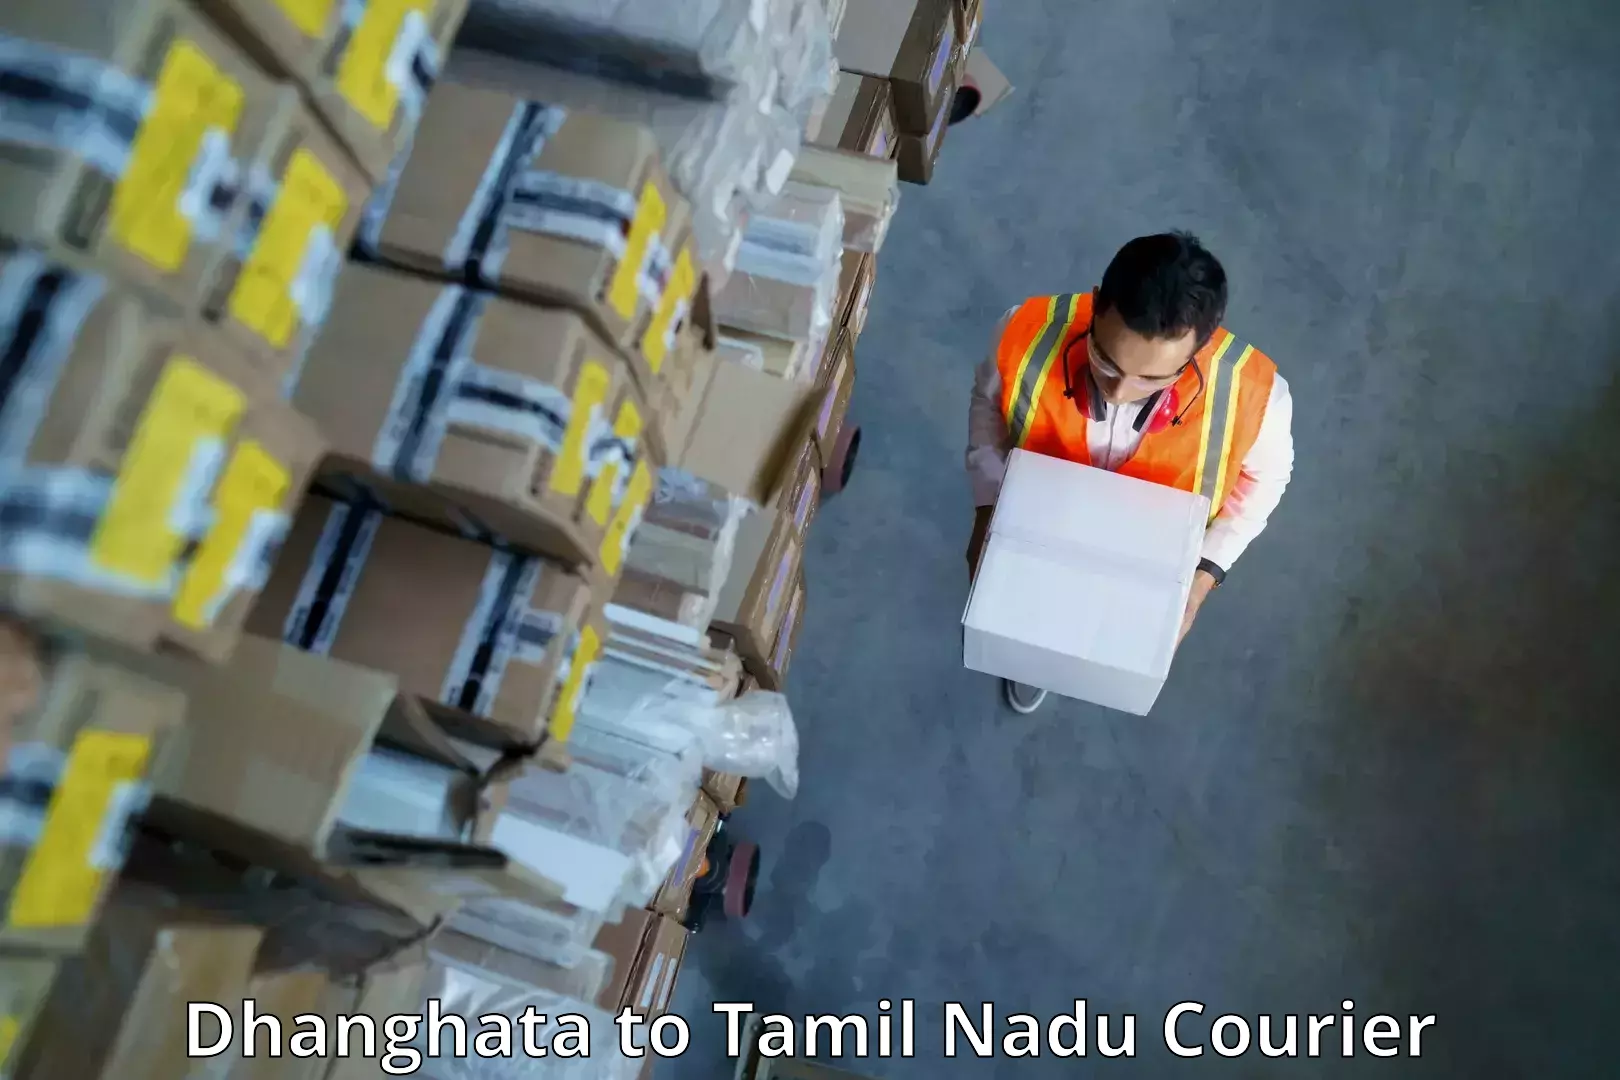 Next-day freight services Dhanghata to Coimbatore